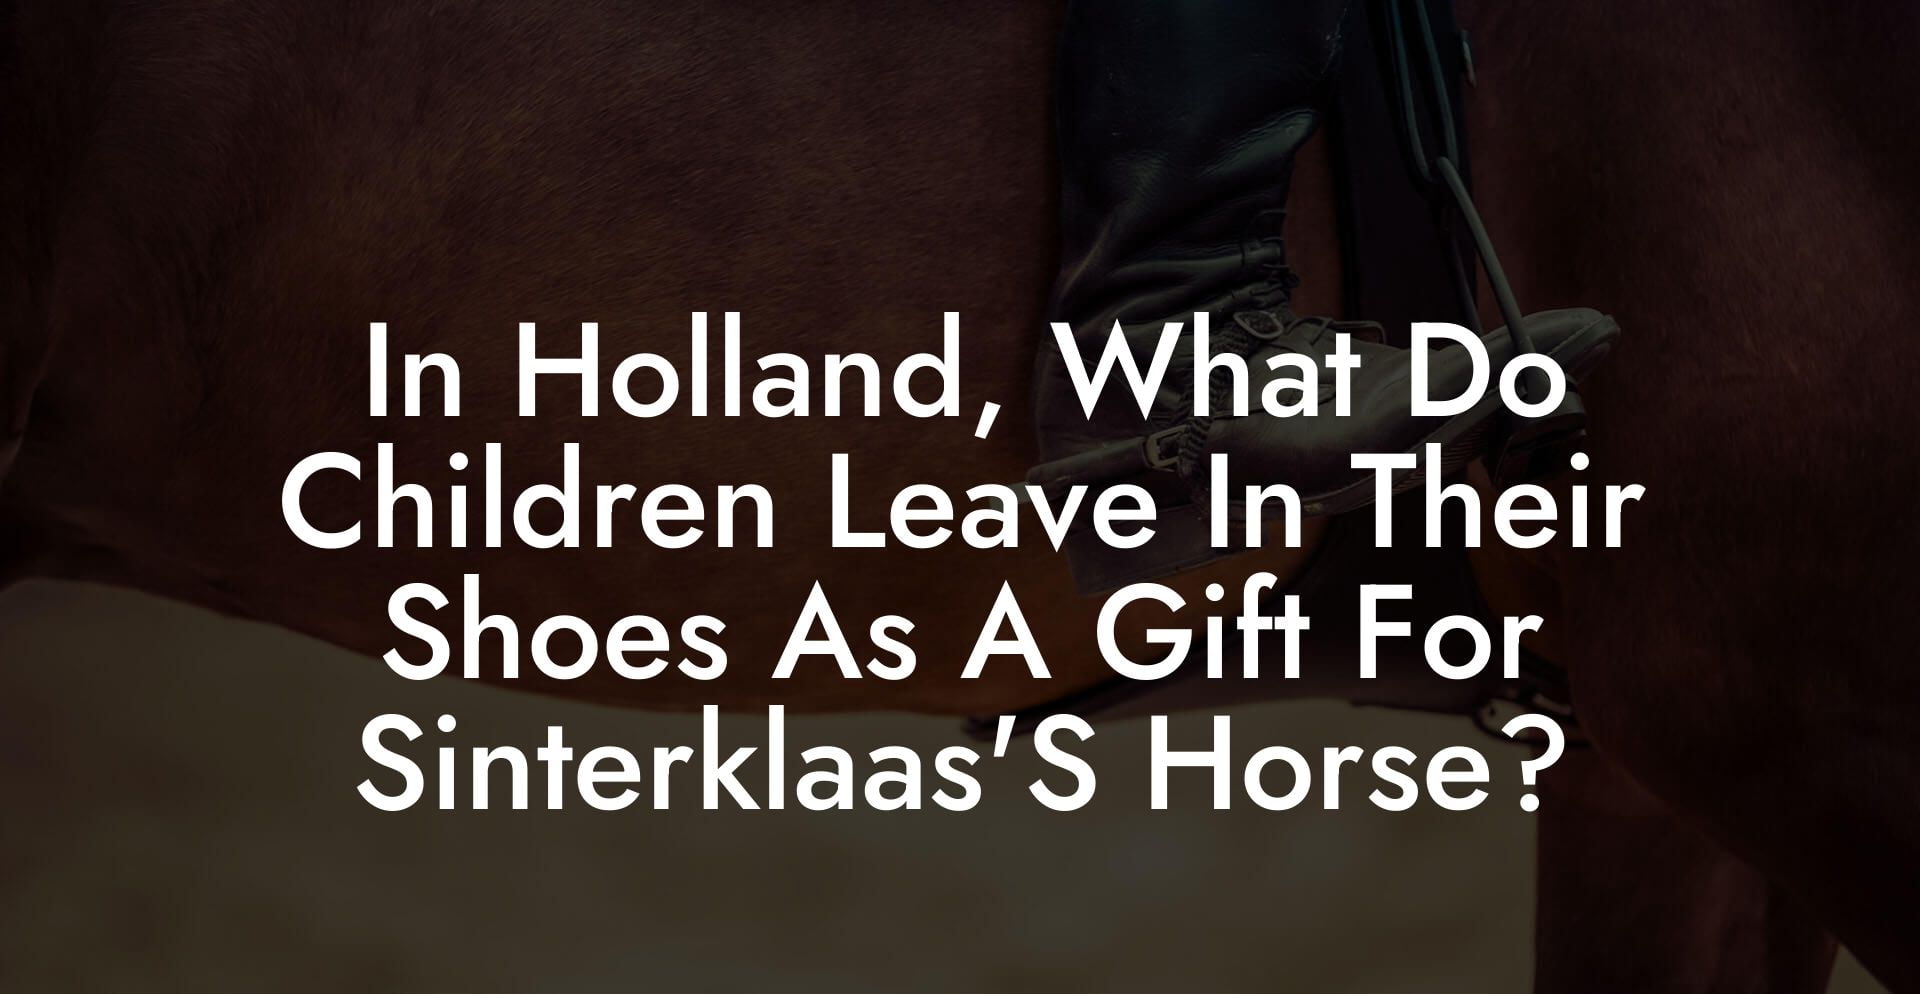 In Holland, What Do Children Leave In Their Shoes As A Gift For Sinterklaas'S Horse?